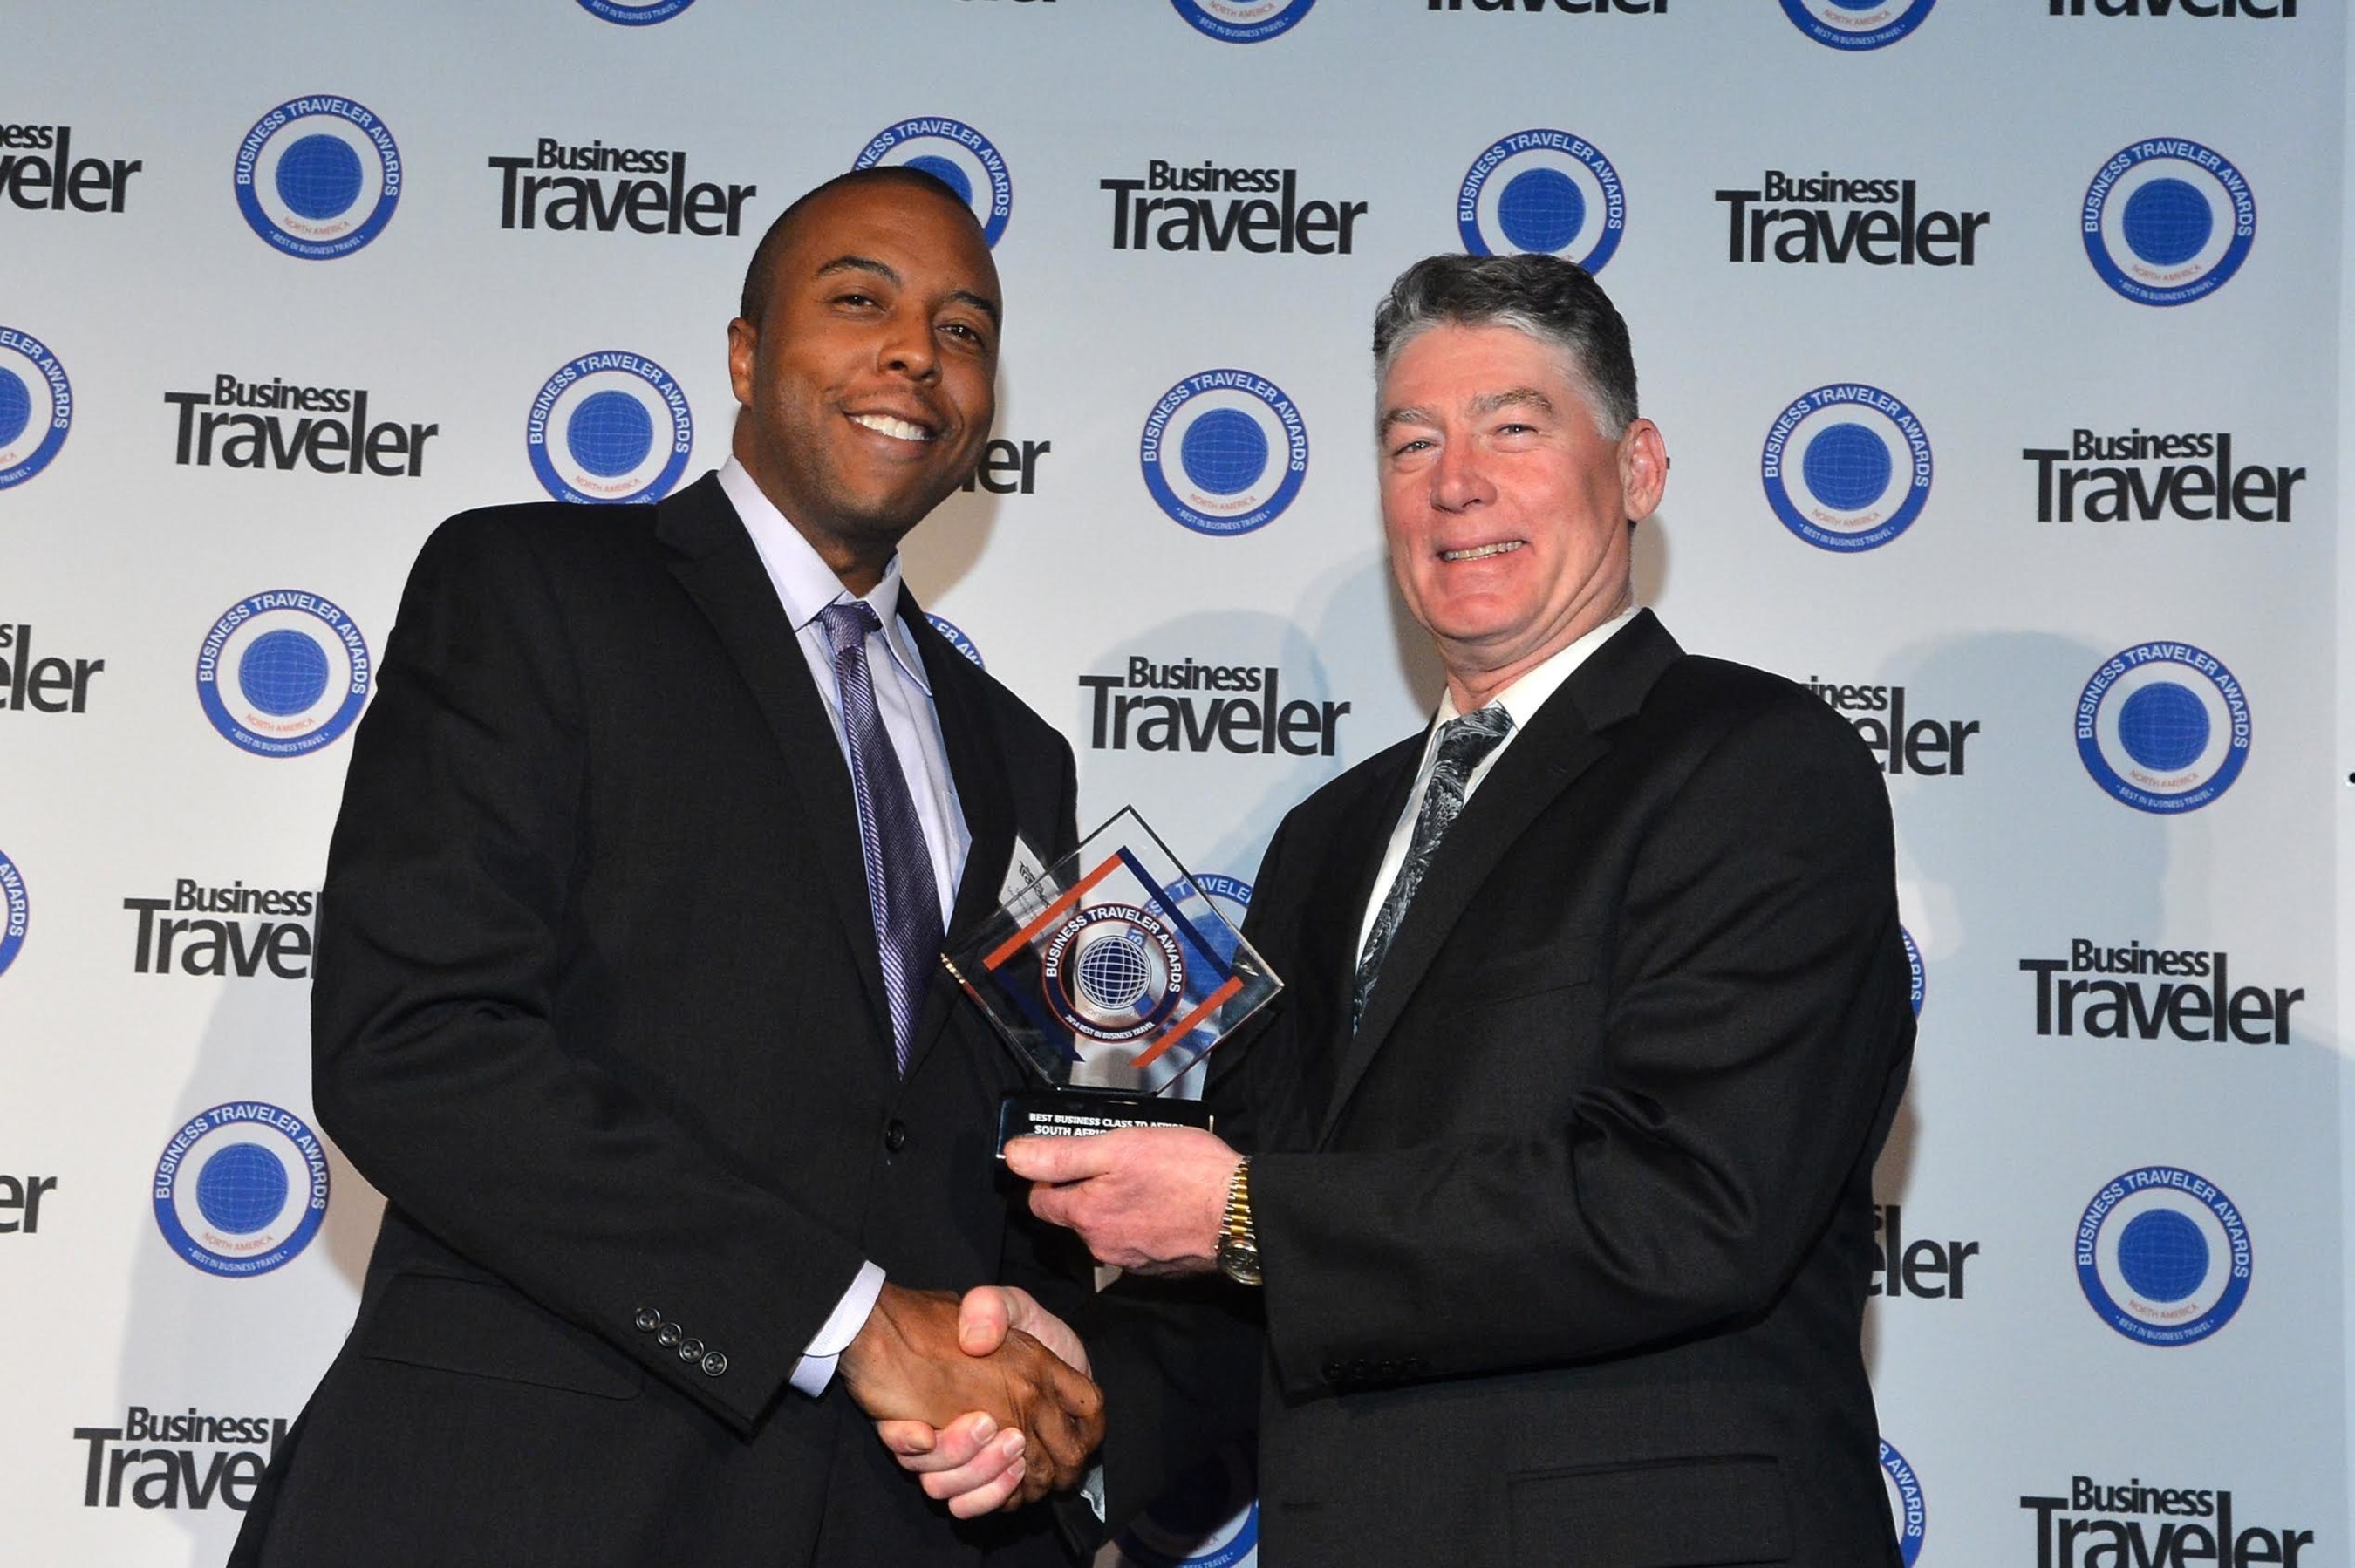 Damion Rose, Manager Marketing Promotions for South African Airways receiving the awards from Jerry Allison, Group Publisher at Business Traveler.